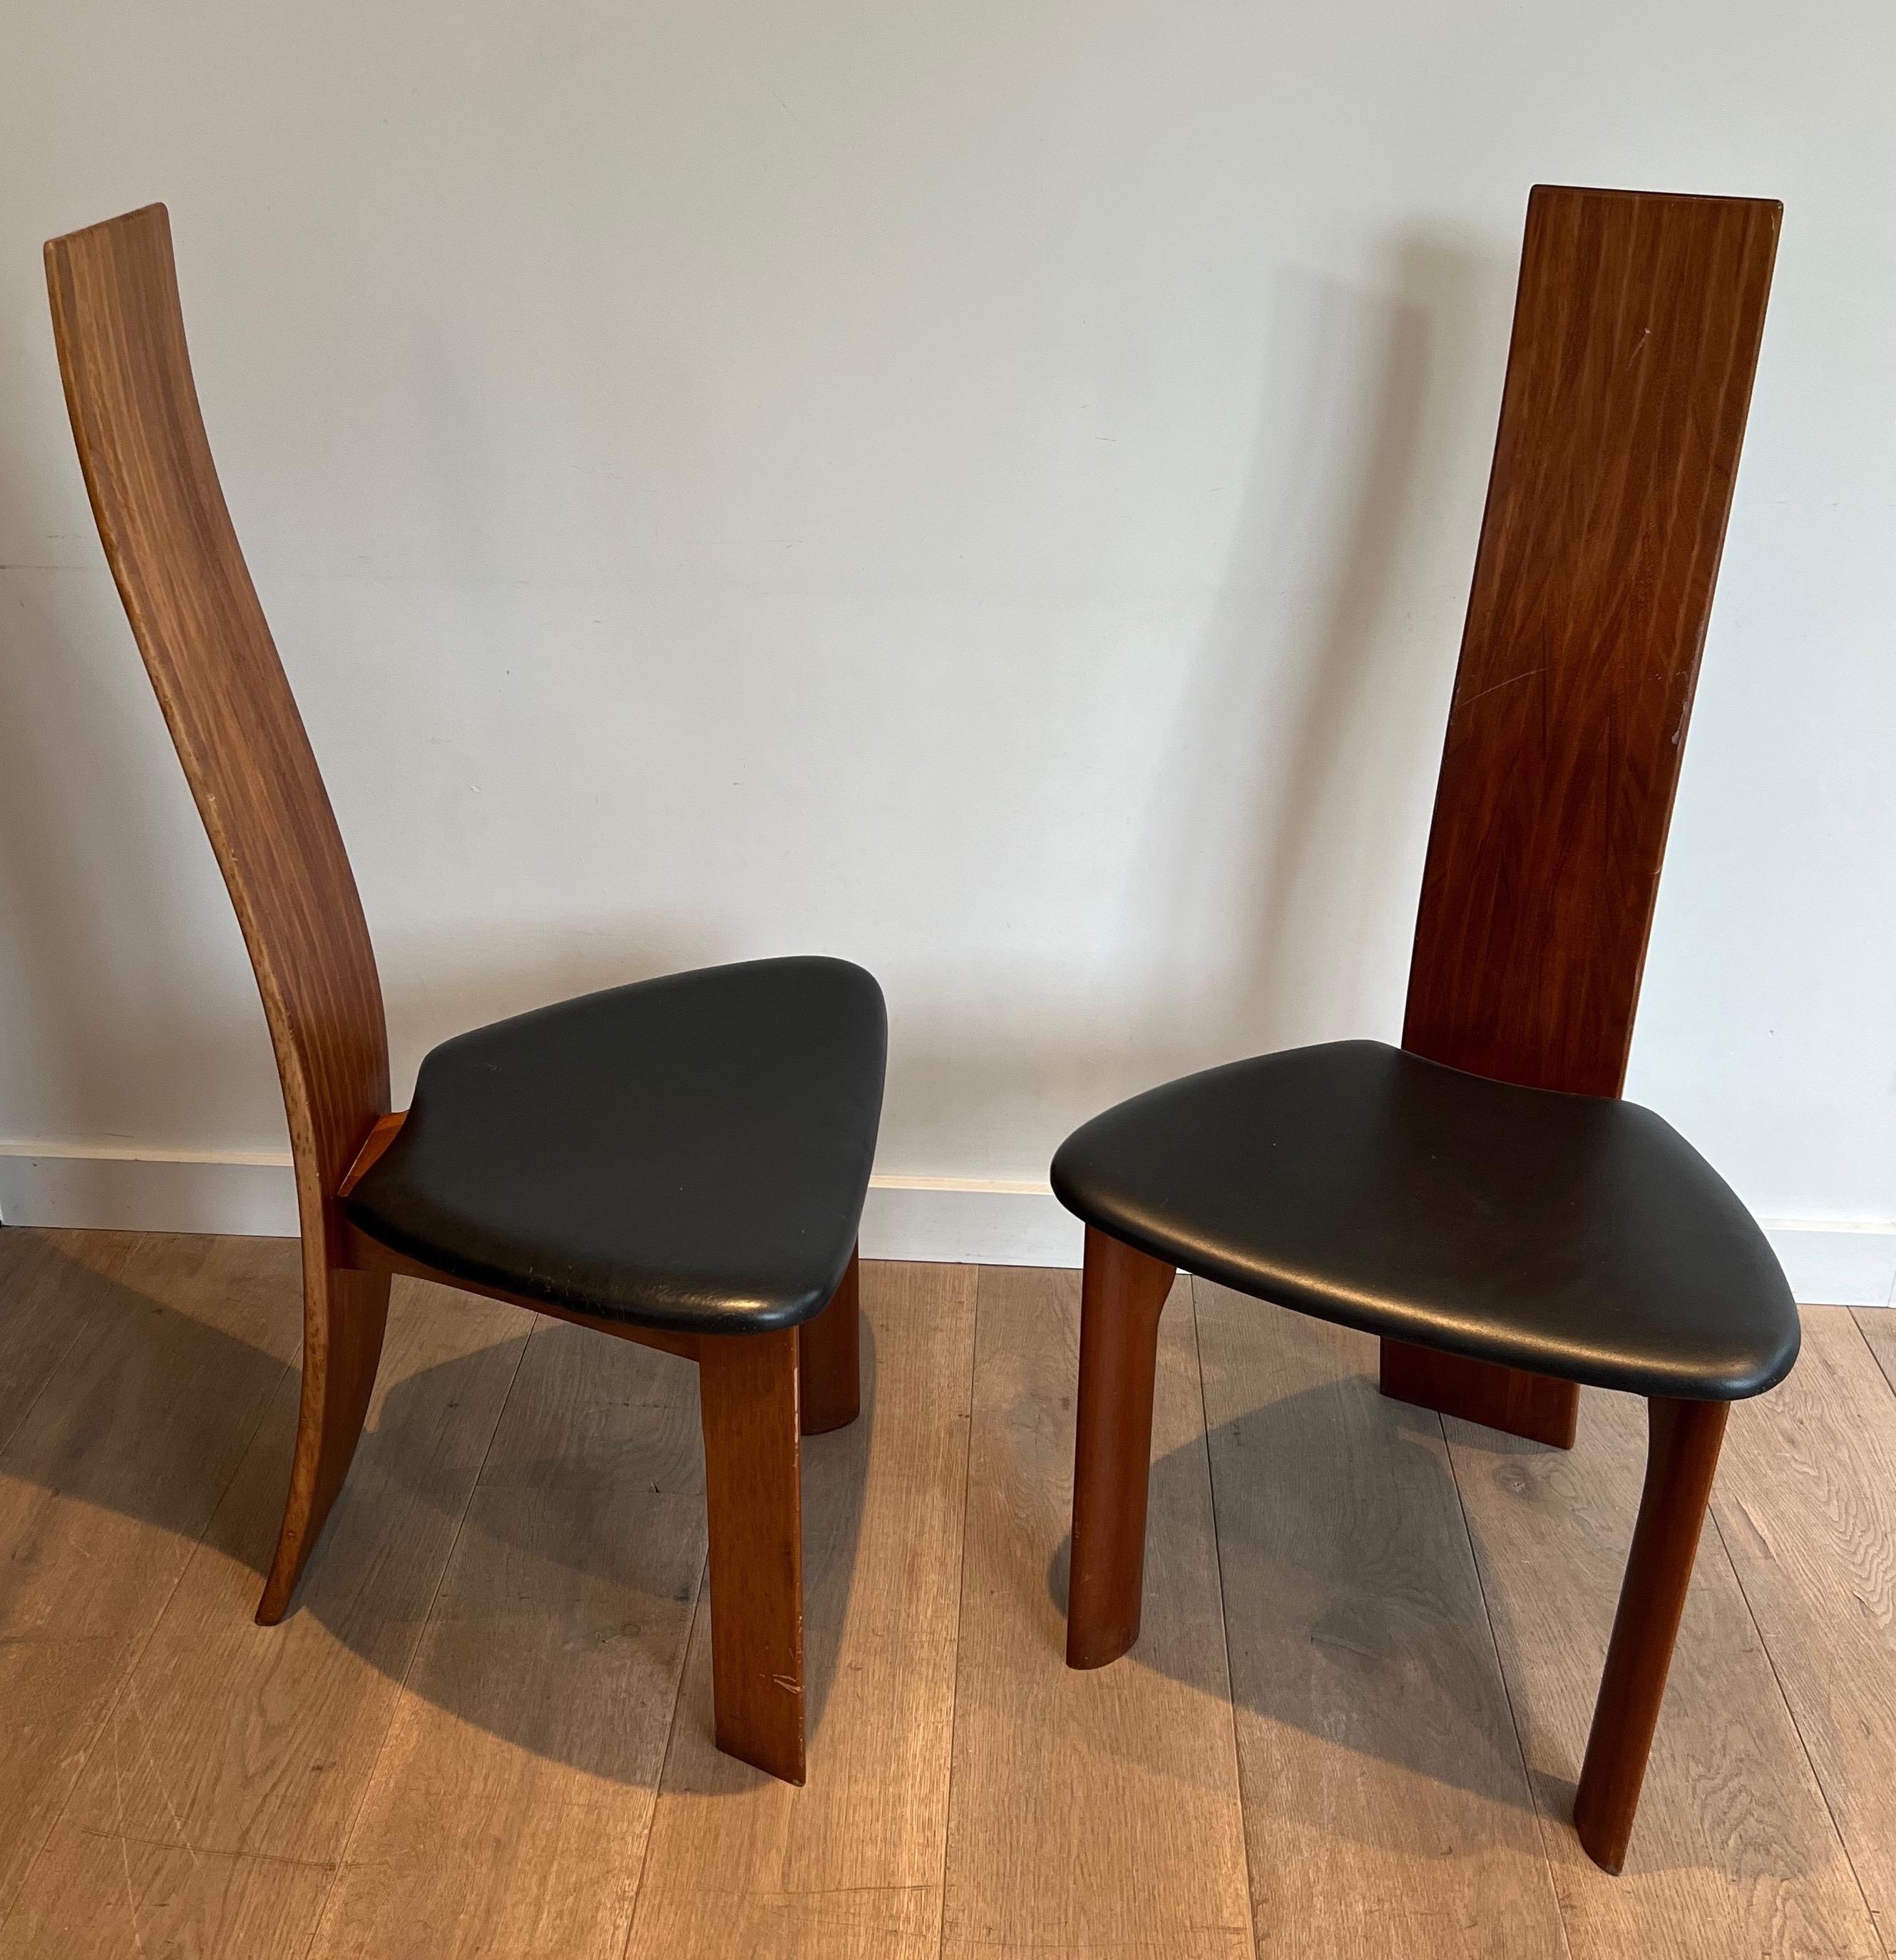 This pair of chairs is made of exotic wood with black leather seats, This is a French Work. Circa 1970